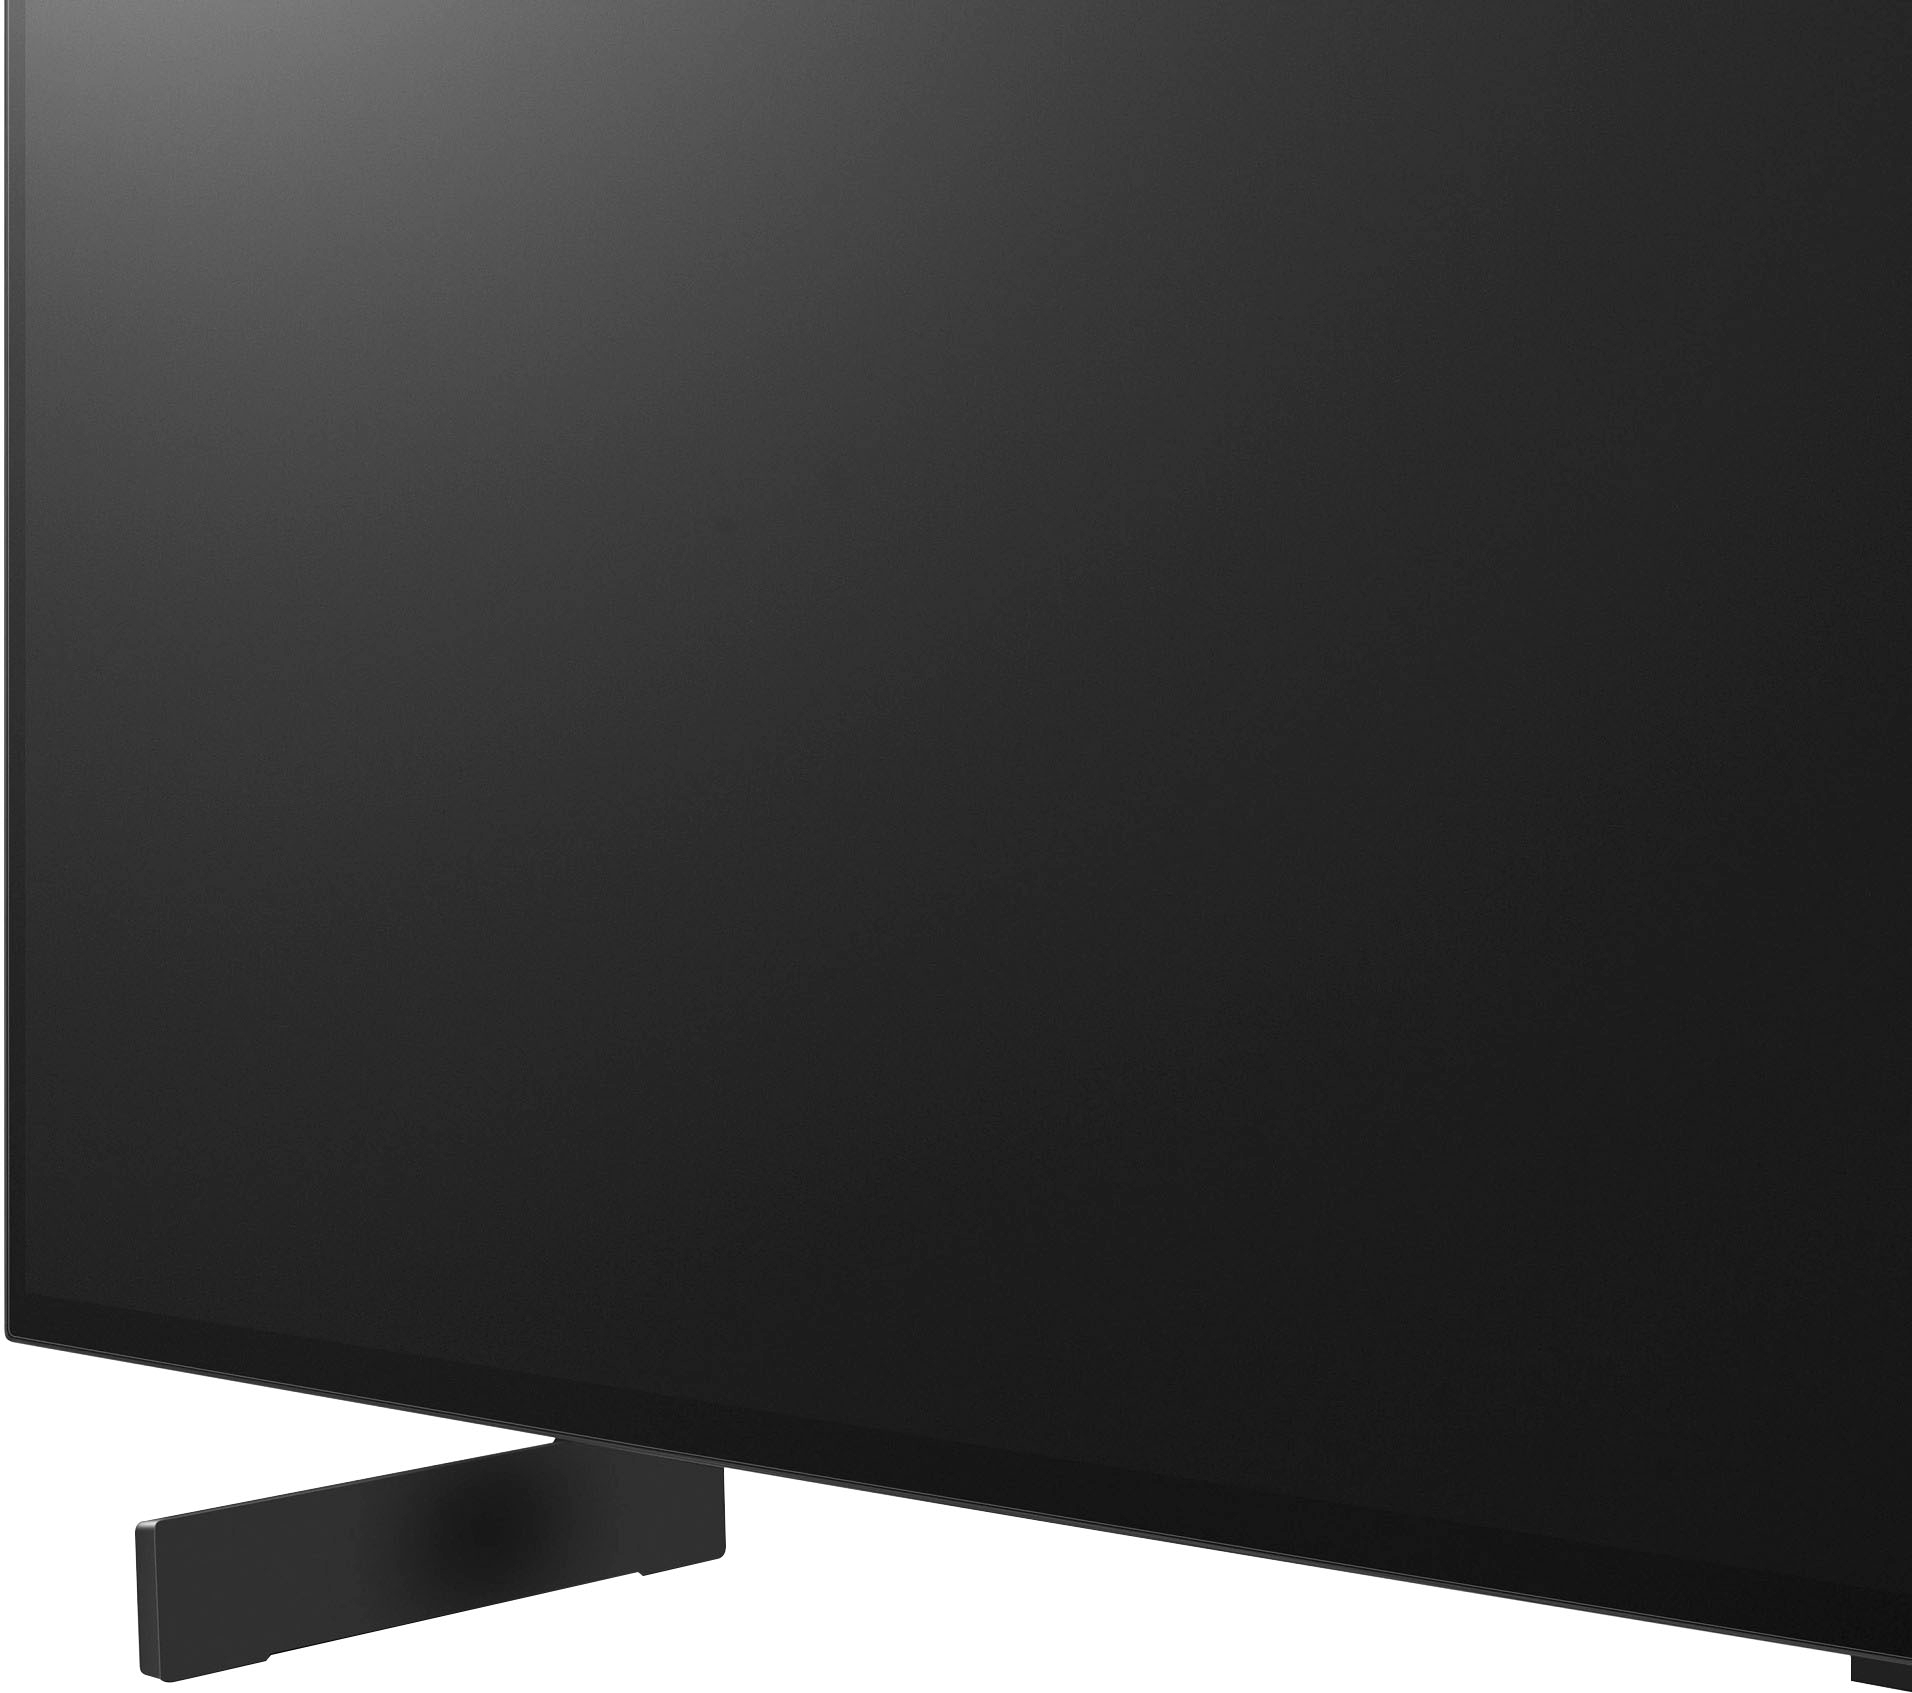 LG's new 42-inch OLED gaming TV 